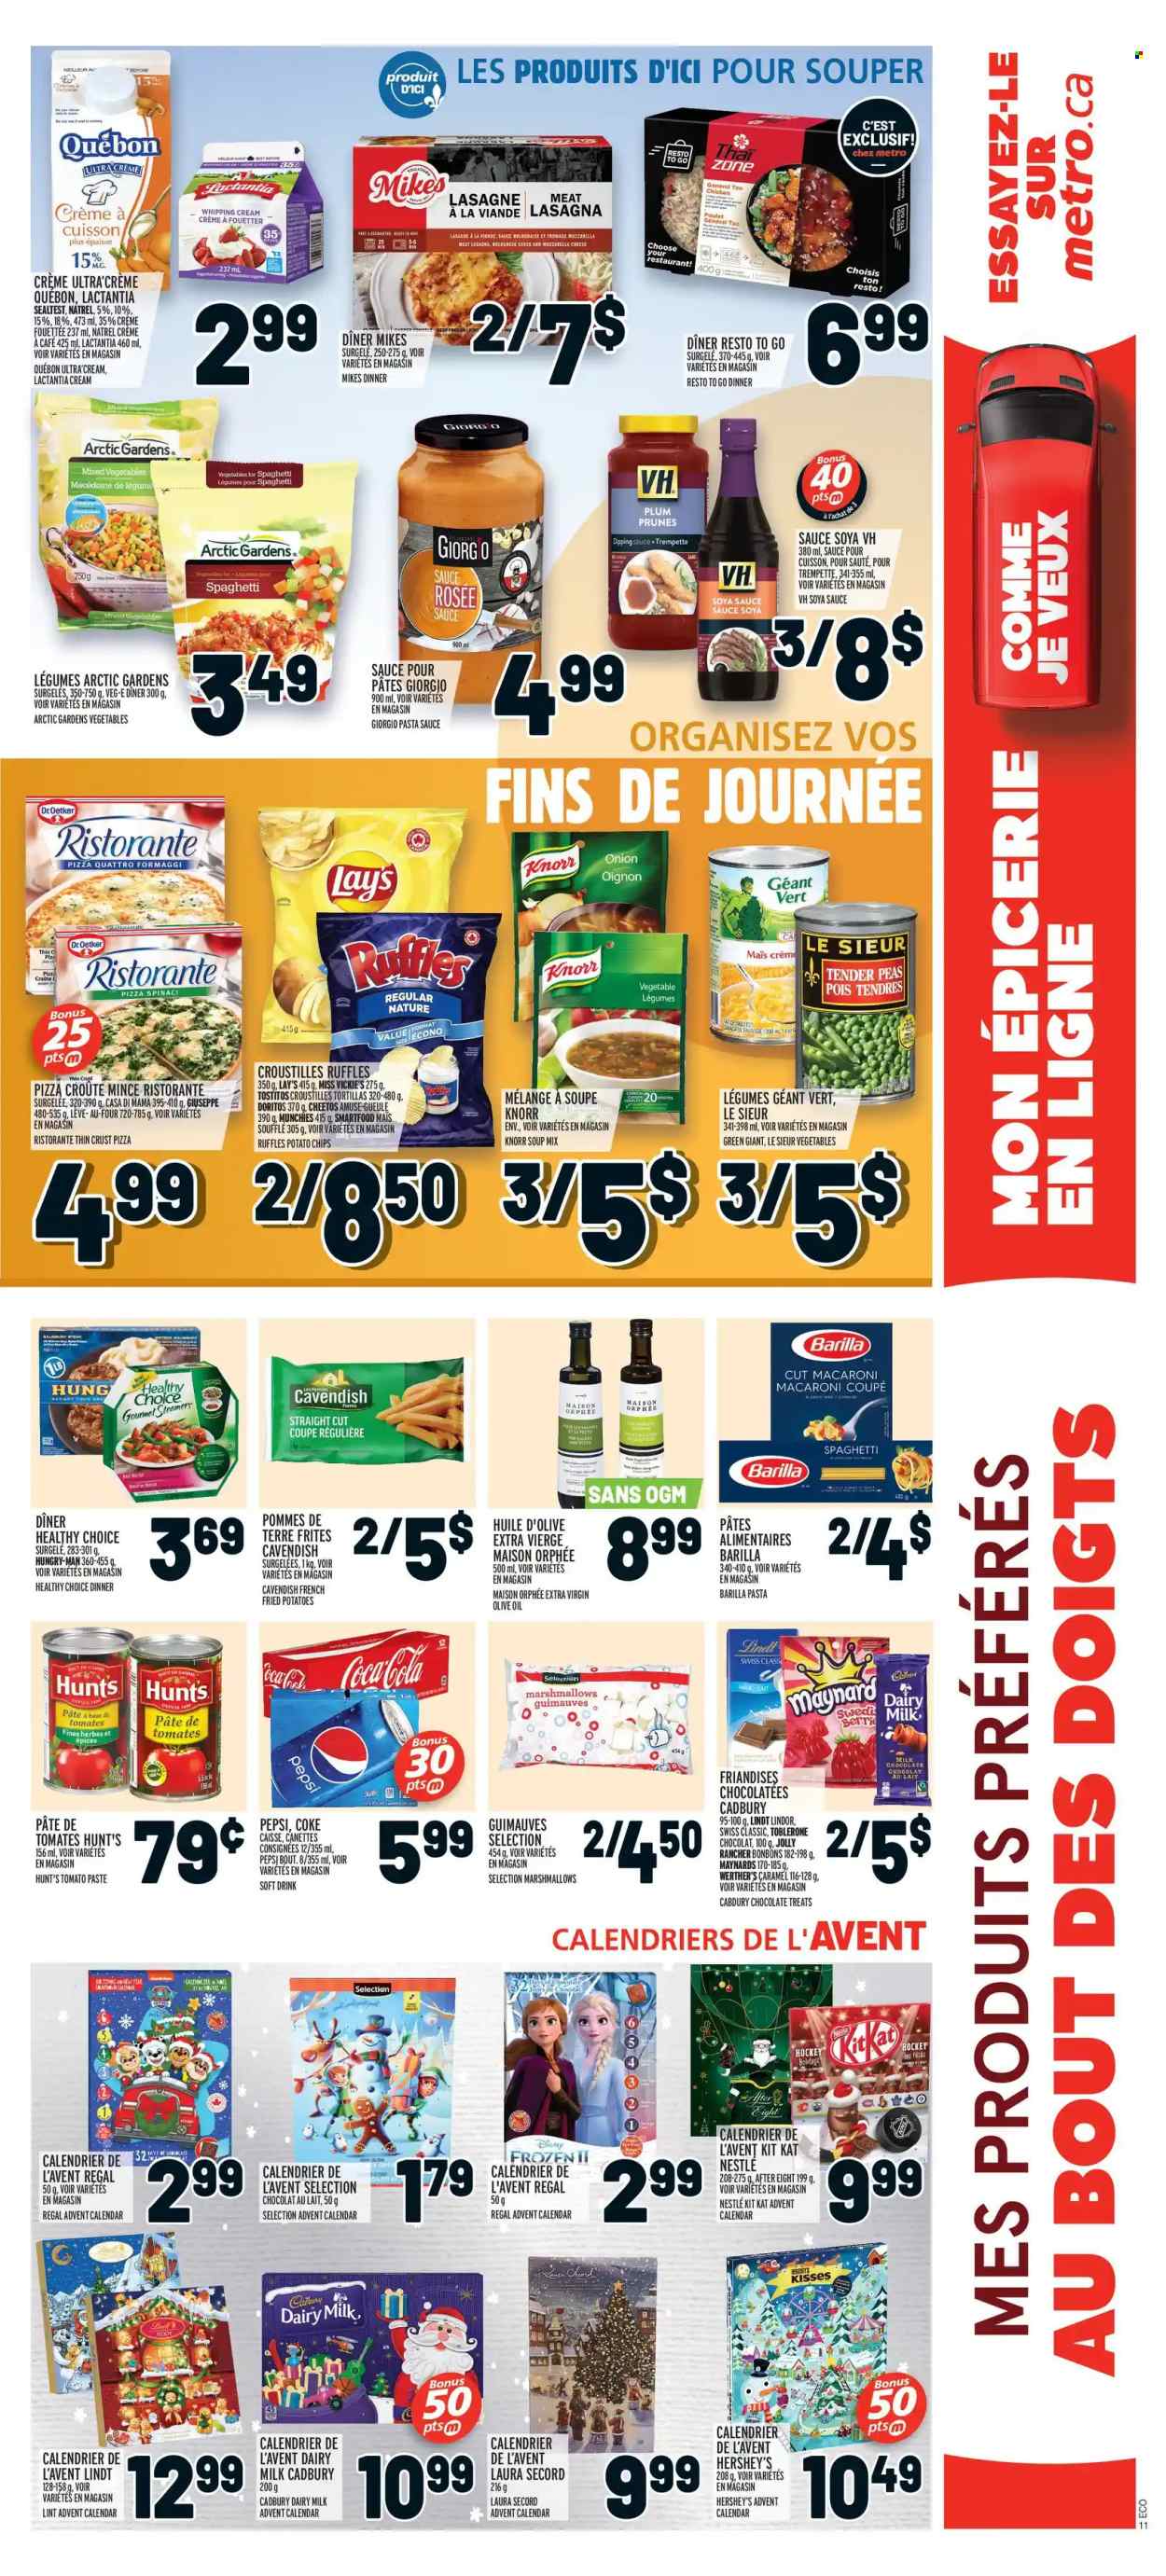 thumbnail - Metro Flyer - November 04, 2021 - November 10, 2021 - Sales products - tortillas, peas, salad, spaghetti, pizza, pasta sauce, soup mix, macaroni, soup, sauce, Barilla, lasagna meal, Healthy Choice, Dr. Oetker, advent calendar, whipping cream, Hershey's, mixed vegetables, marshmallows, milk chocolate, chocolate, KitKat, Toblerone, After Eight, Cadbury, Dairy Milk, Doritos, potato chips, Cheetos, Lay’s, Smartfood, Ruffles, Tostitos, tomato paste, caramel, soy sauce, extra virgin olive oil, olive oil, oil, prunes, dried fruit, Coca-Cola, Pepsi, soft drink, calendar, Knorr, Nestlé, Lindt, Lindor. Page 15.